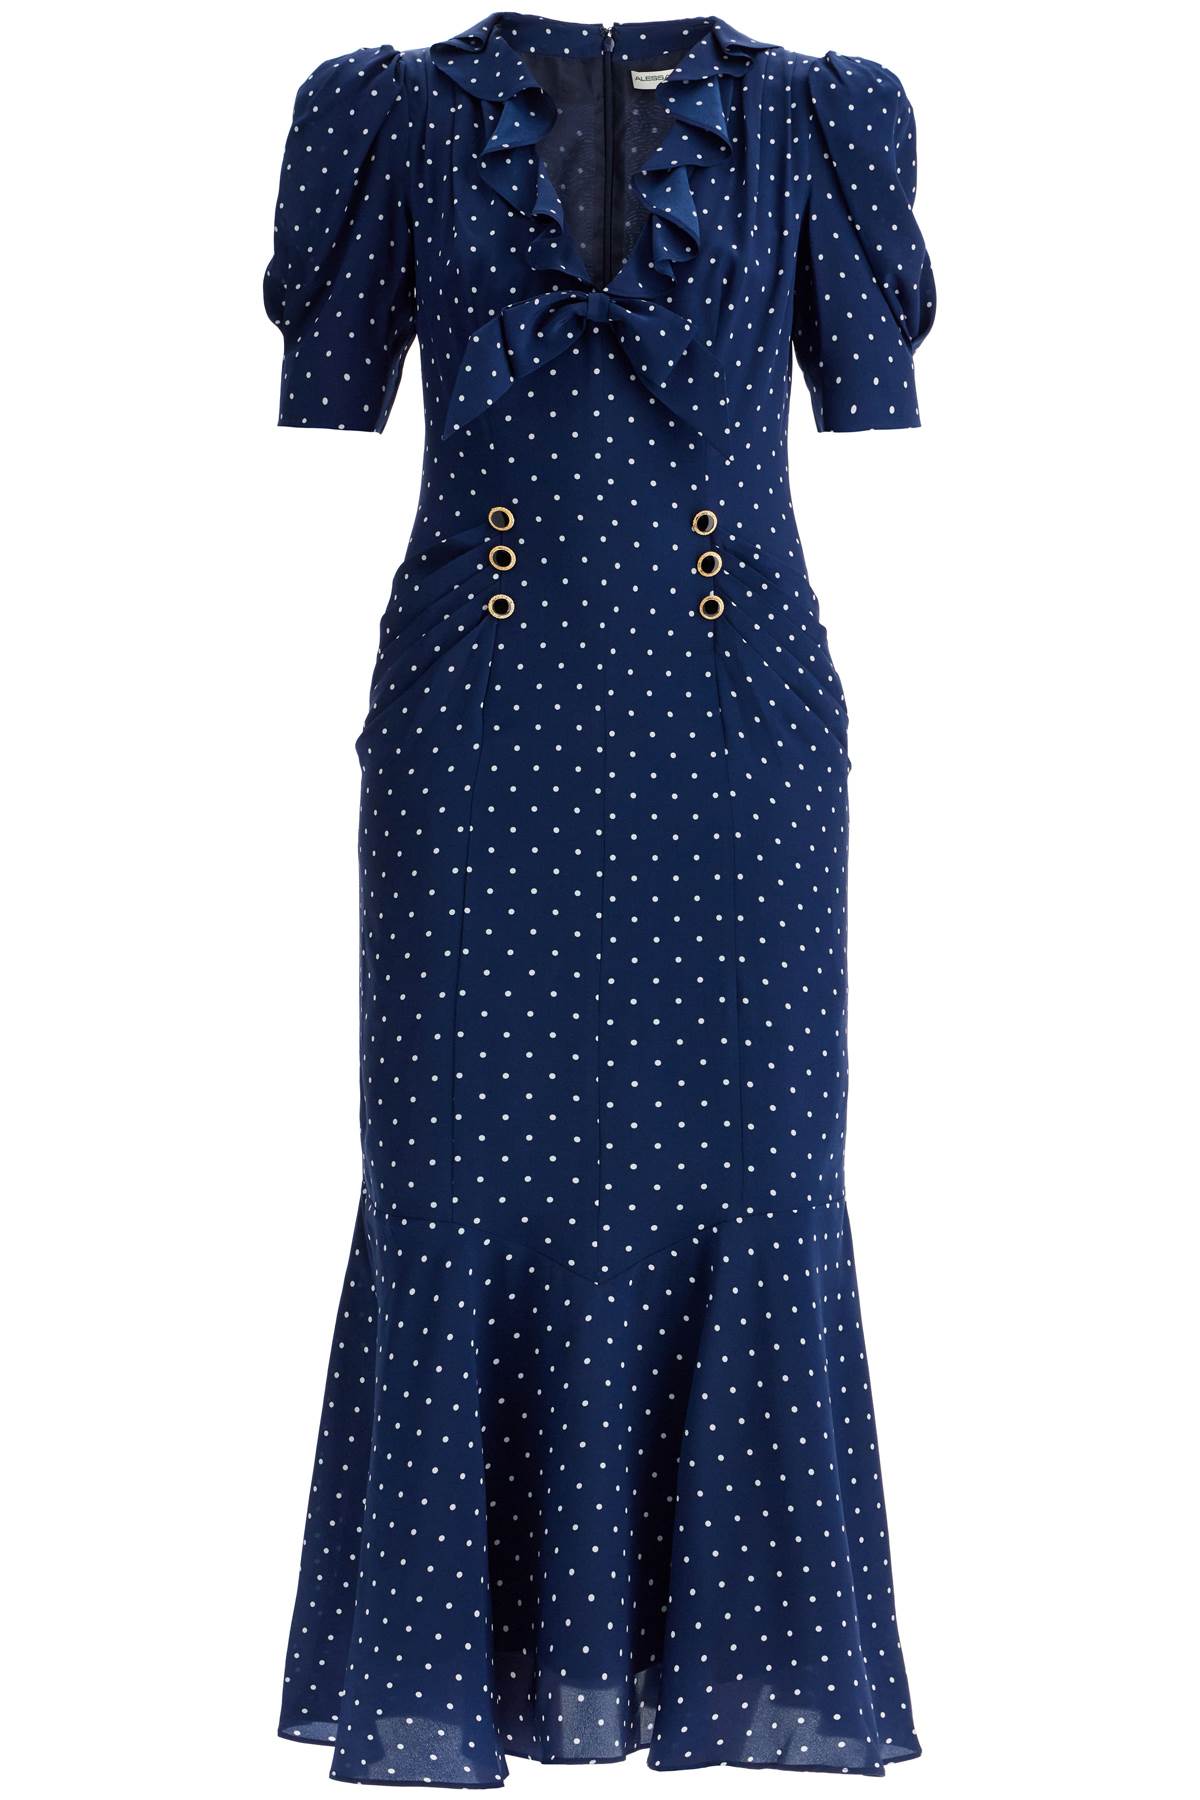 Alessandra Rich "polka Dot Silk Midi Dressreplace With Double Quote   Blue